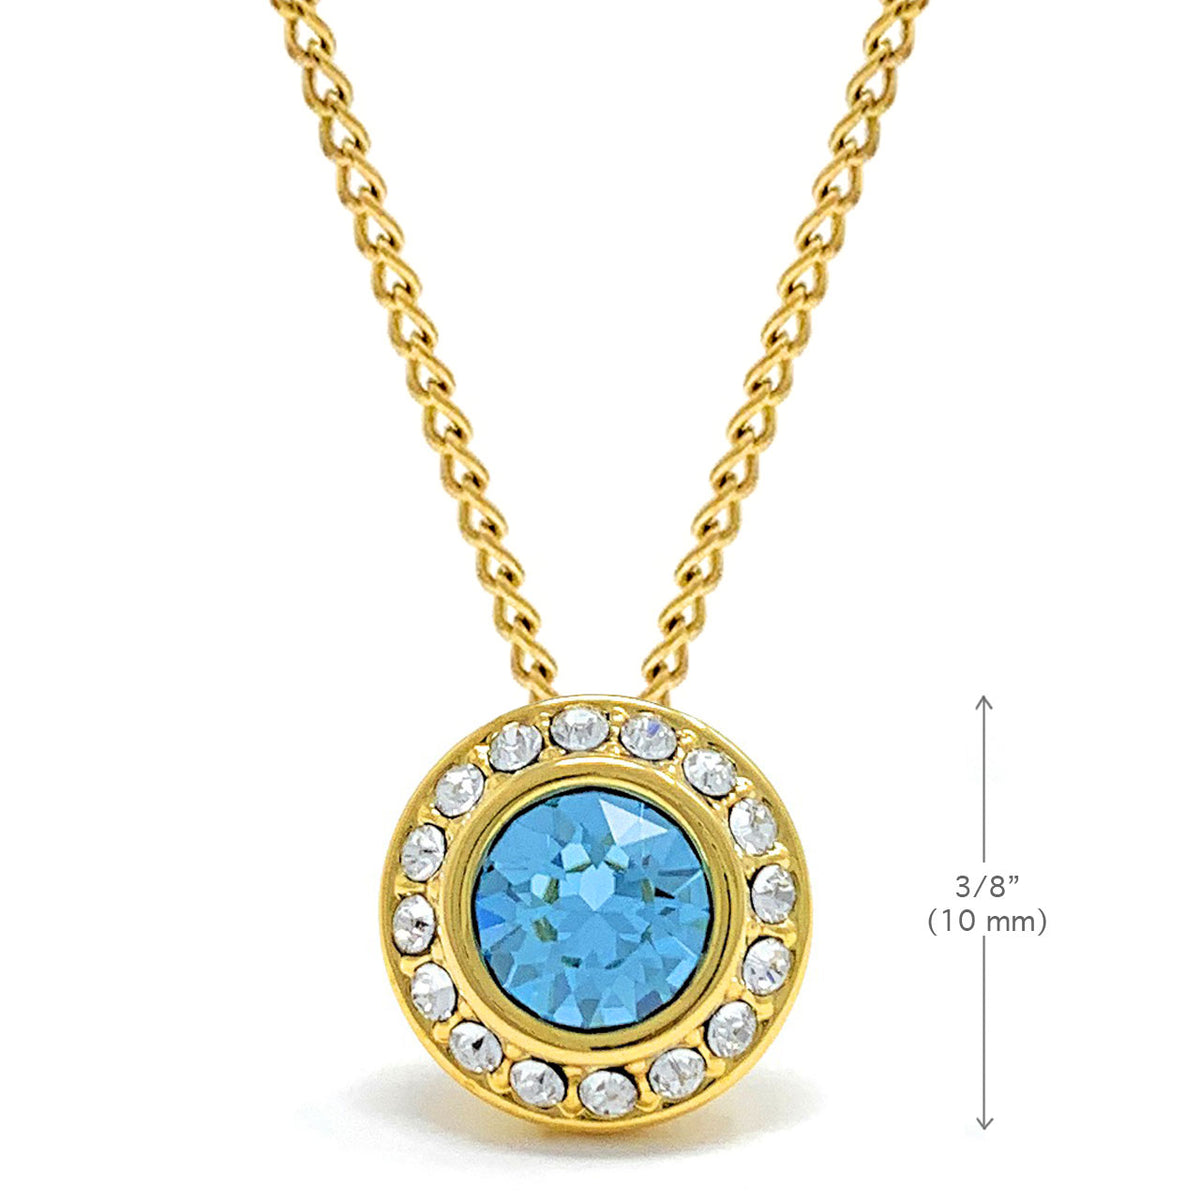 Halo Pave Pendant Necklace with Blue Aquamarine Round Crystals from Swarovski Gold Plated - Ed Heart